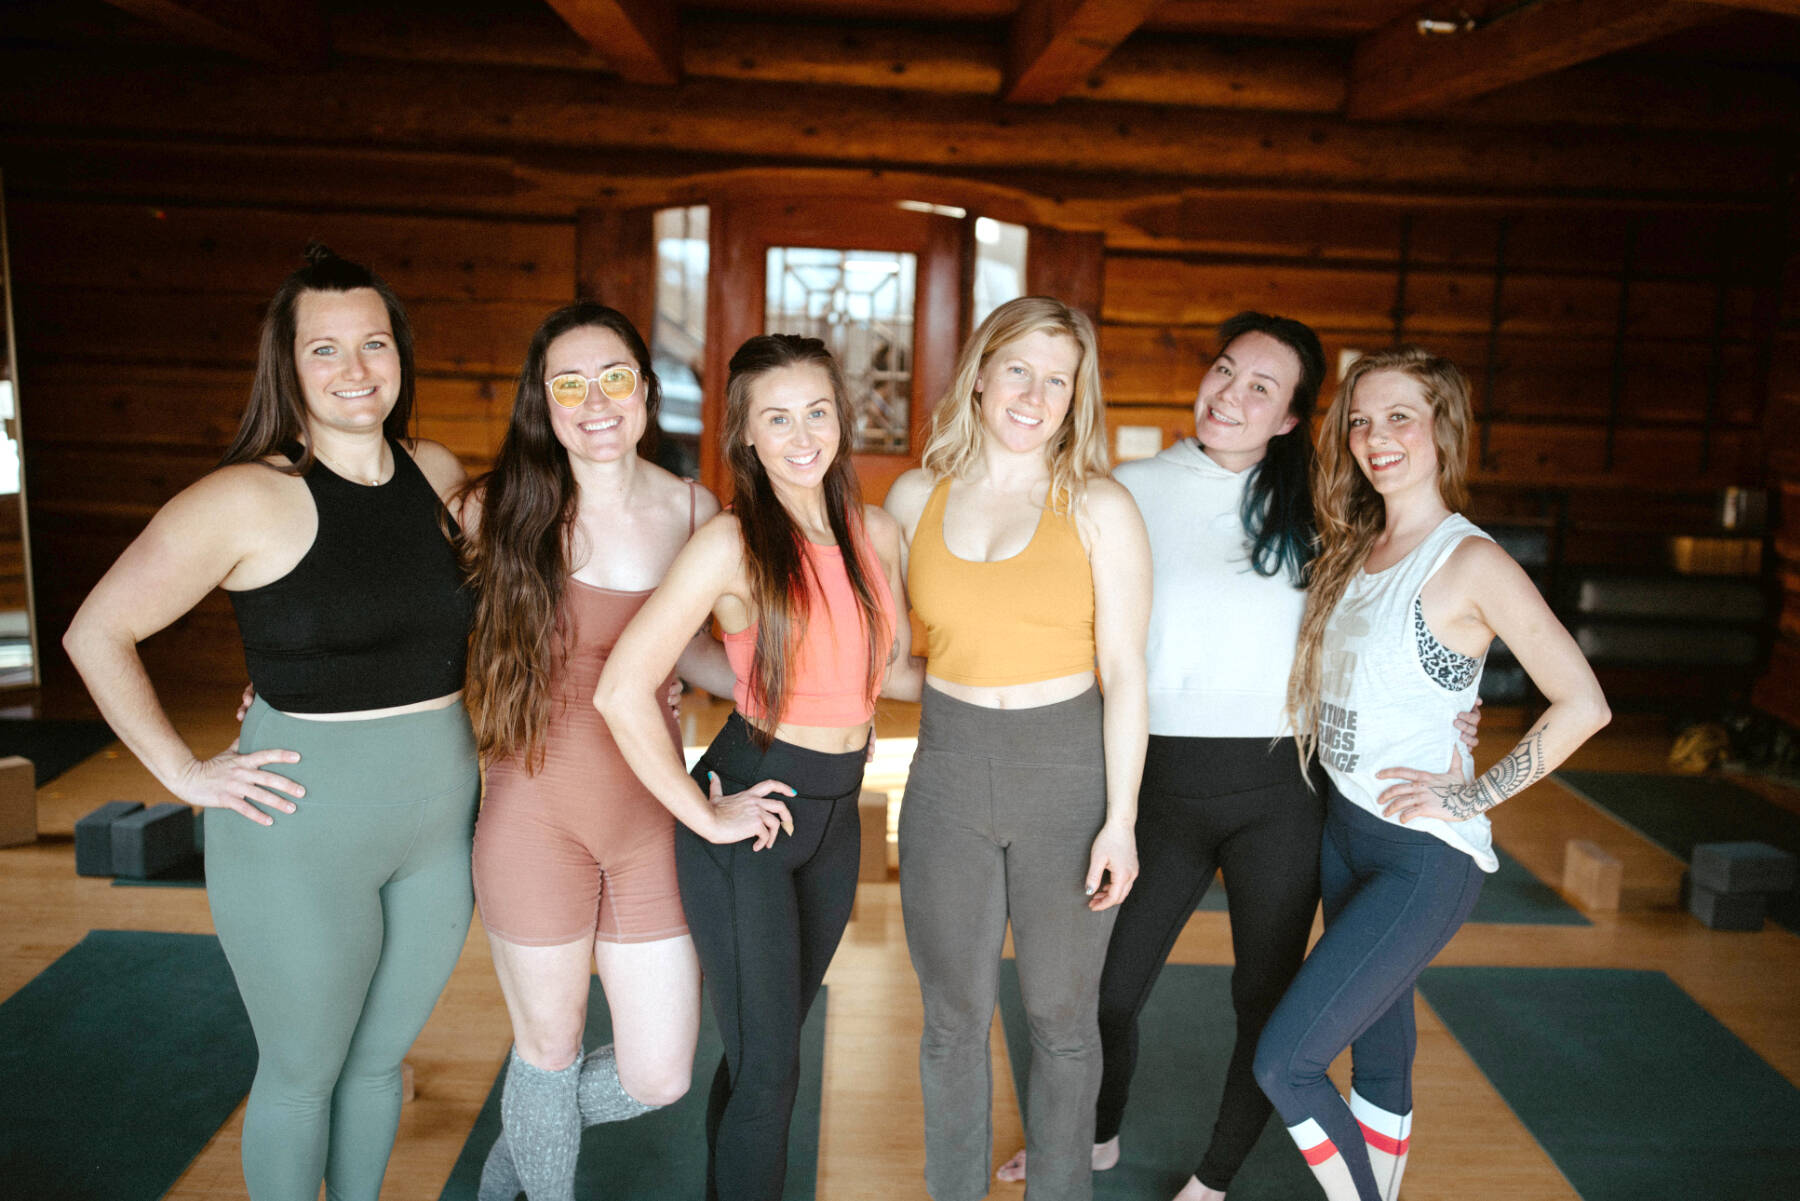 Photos by Joshua Veldstra
Dharmic Spruce yoga instructors (from left to right) Allie Setterquist, Rachael Schmoker, Branden Elde, Marin Lee, Sonya Fry, Britt Huffman, are photographed together in April at Dharmic Spruce.